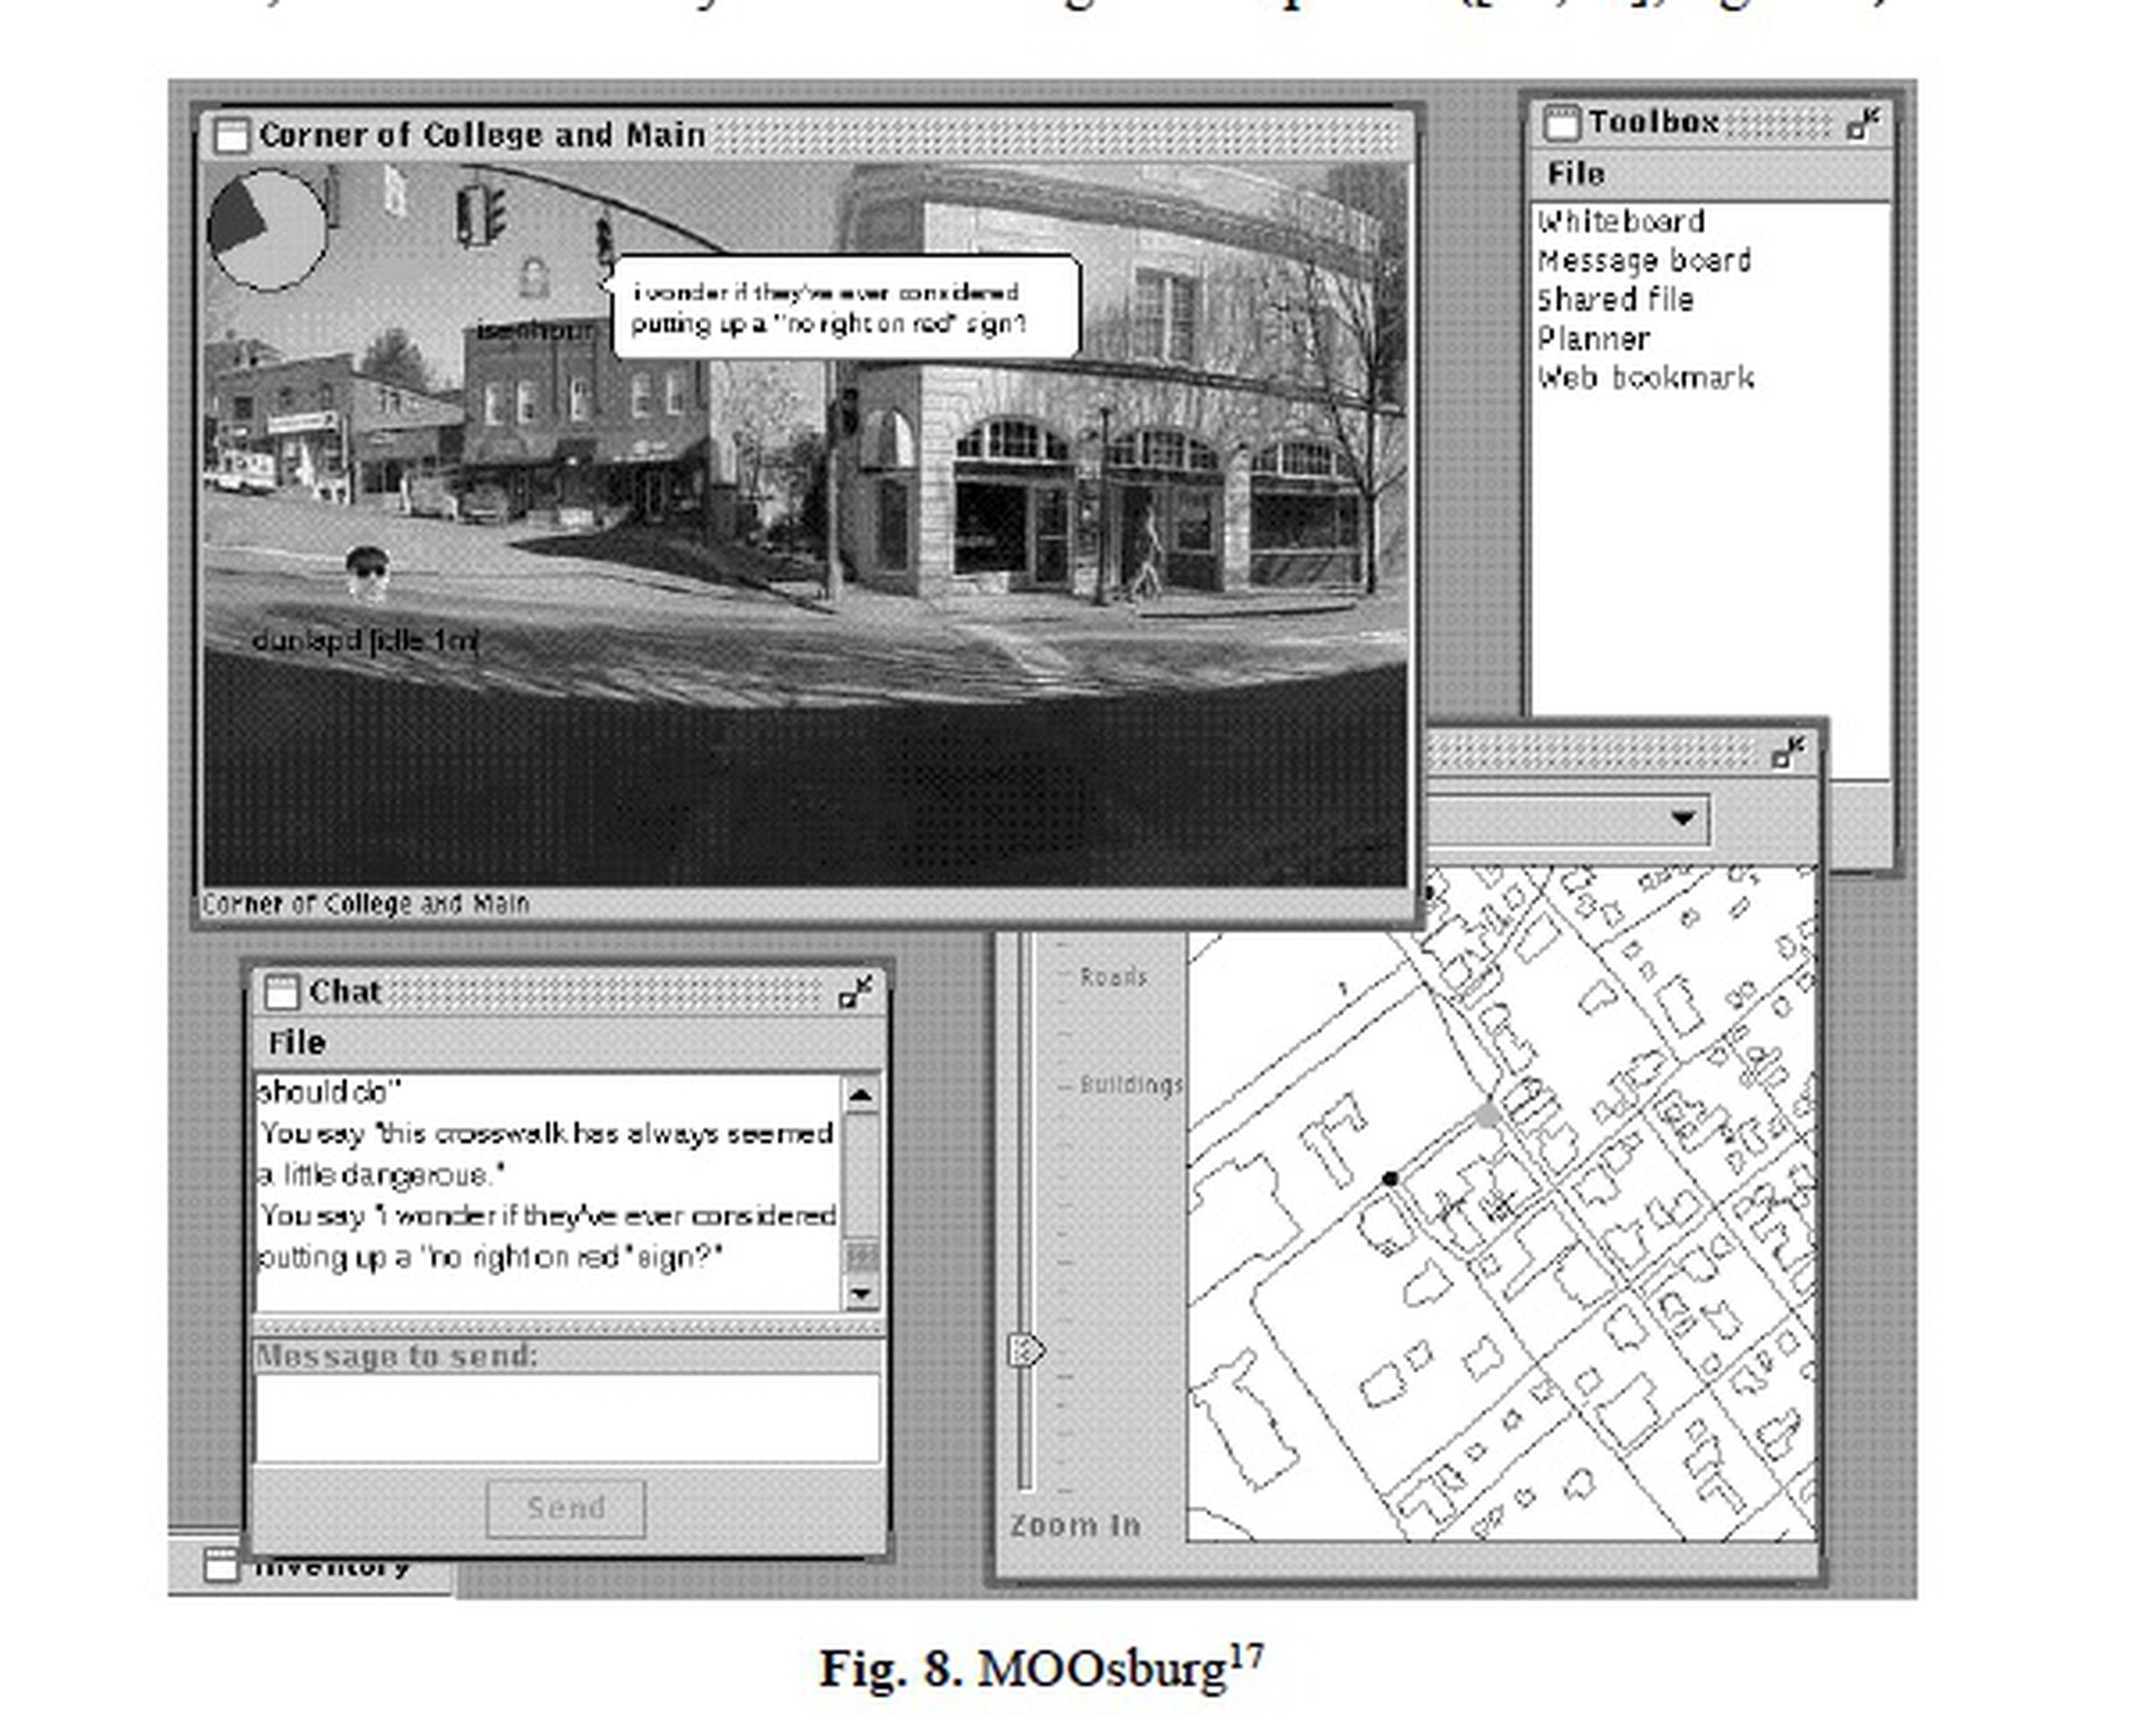 MOOSburg, a form of multi-user domain, was created as an addition to the BEV. It provided real-time, situated, place-based information to community members, relying on the actual geography of Blacksburg. It was designed to make the BEV more interactive and to help users feel like it was a "real" place. 